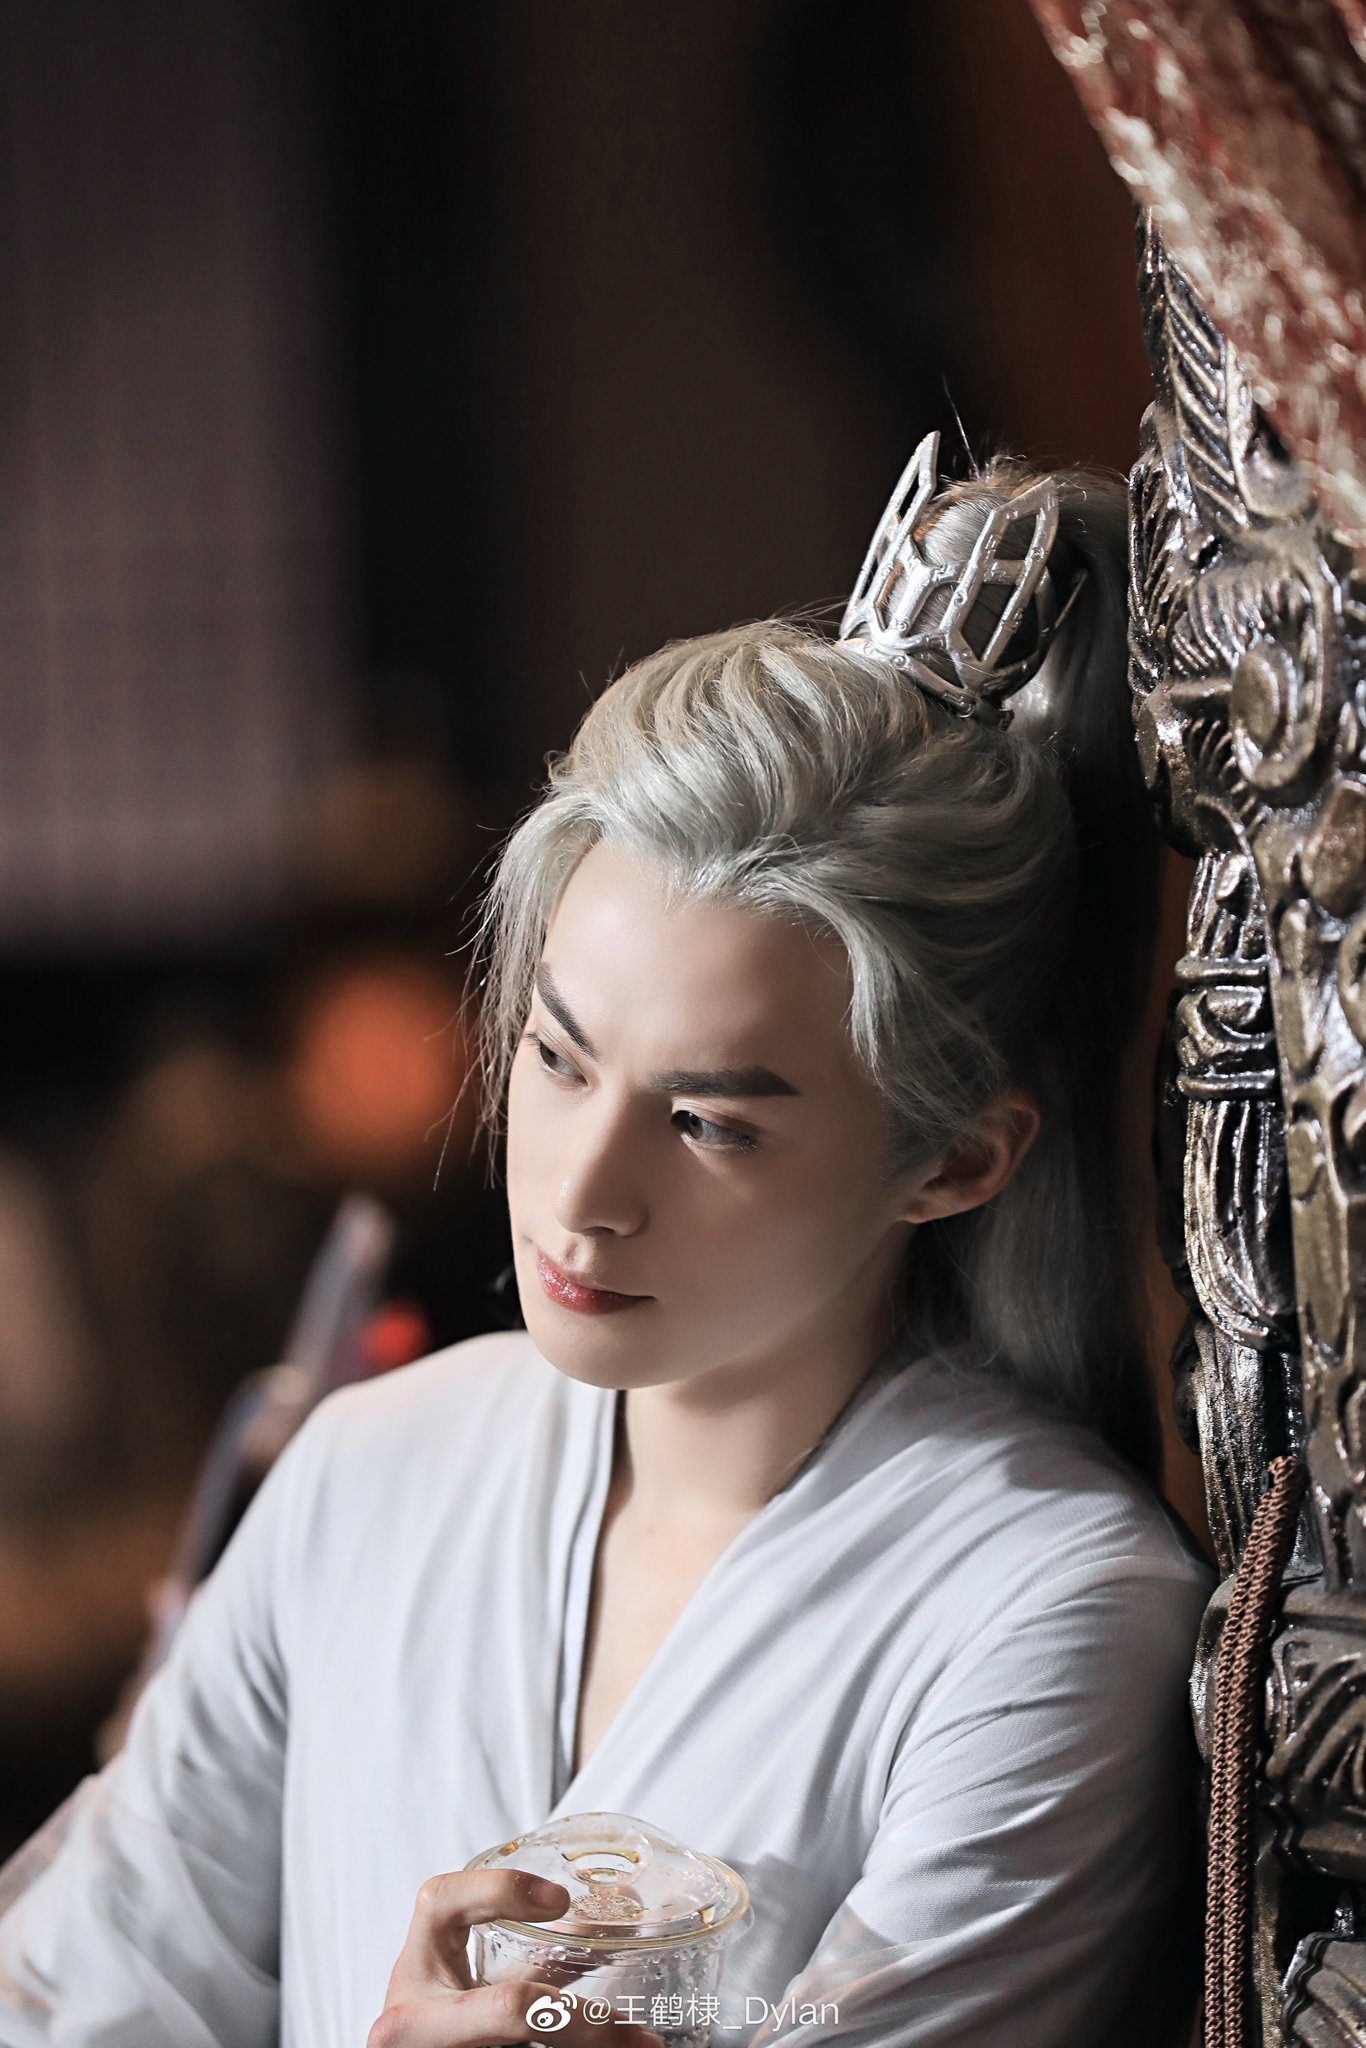 Dylan Wang & Shen Yue 🇵🇭 on X: RT @DWUniversePH: 051021 — Dylan Wang's  Weibo Update 🐉 “Here it is, the white hair style you all wanted”  #missthedragon #王鹤棣 #dylanwang #… / X